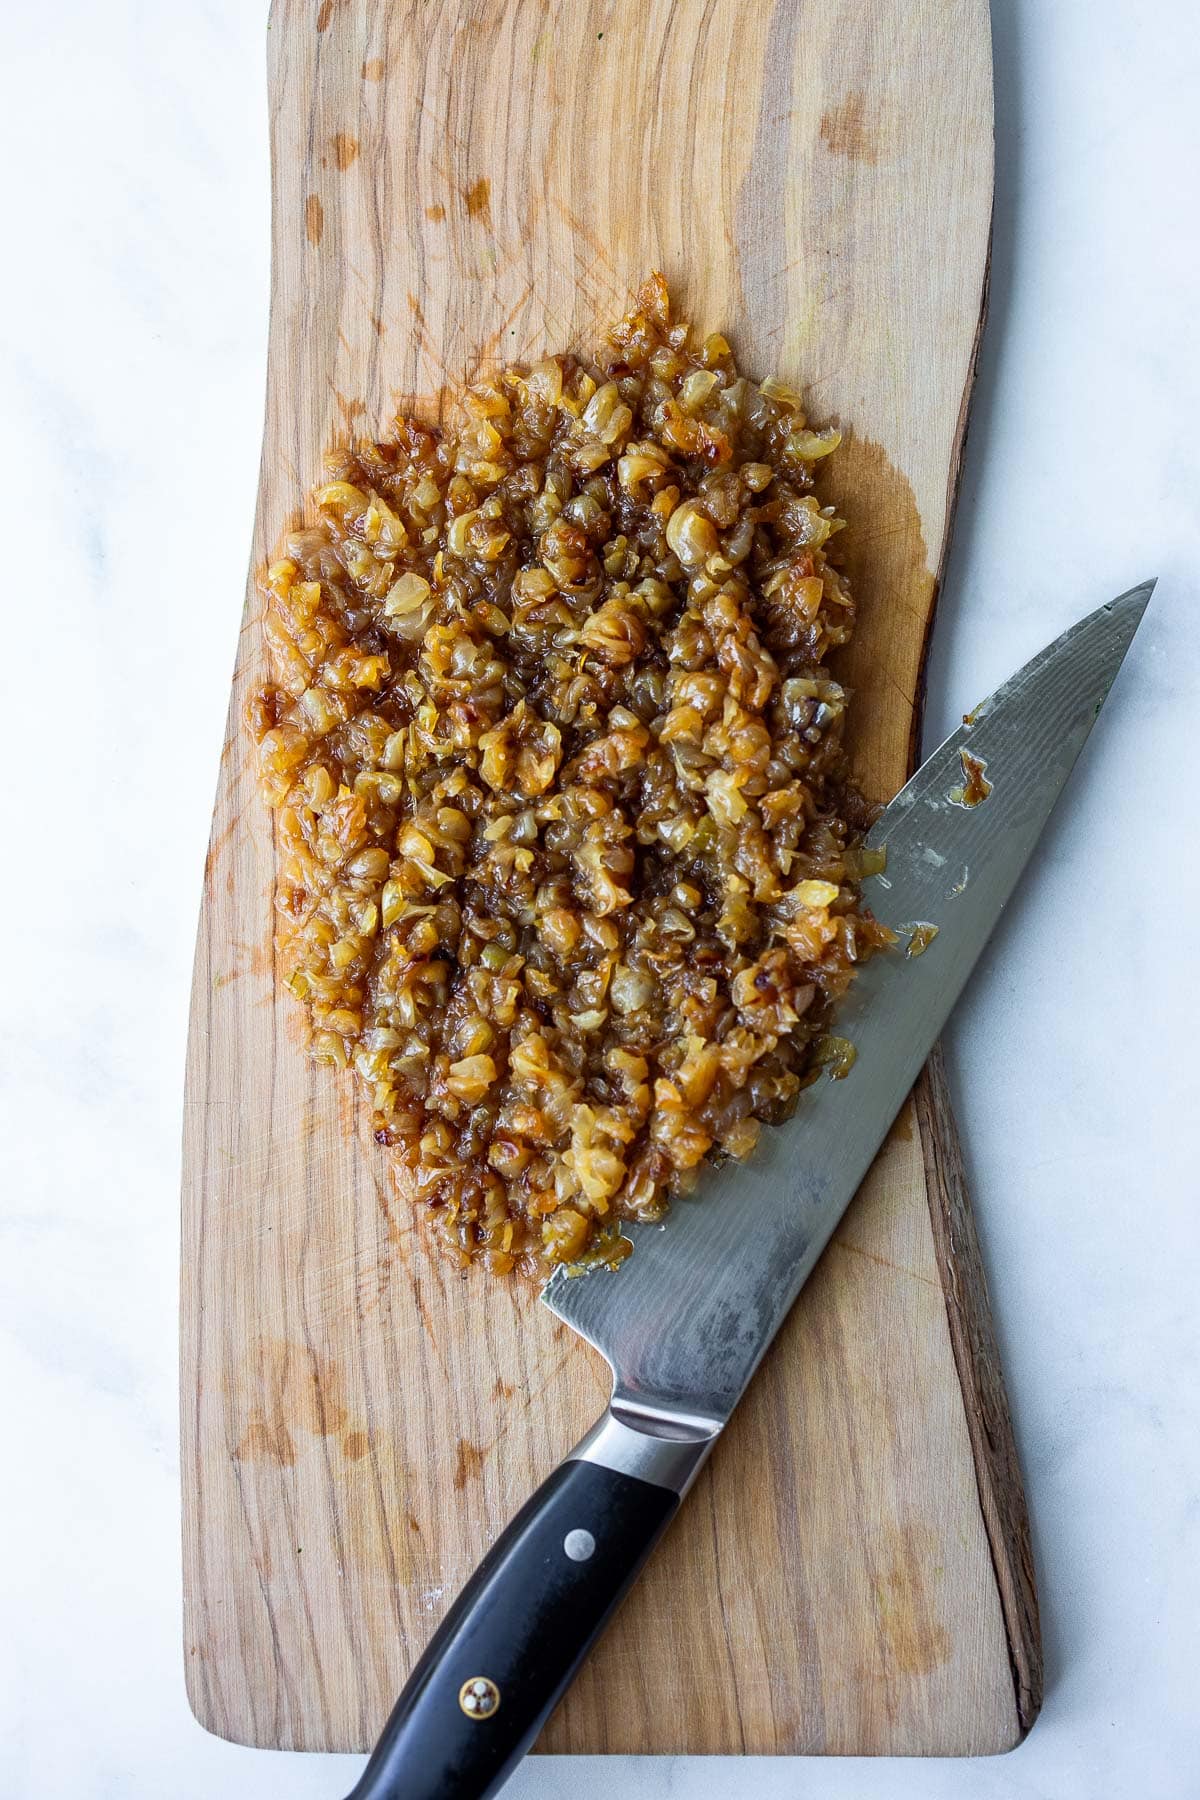 Diced caramelized onions.